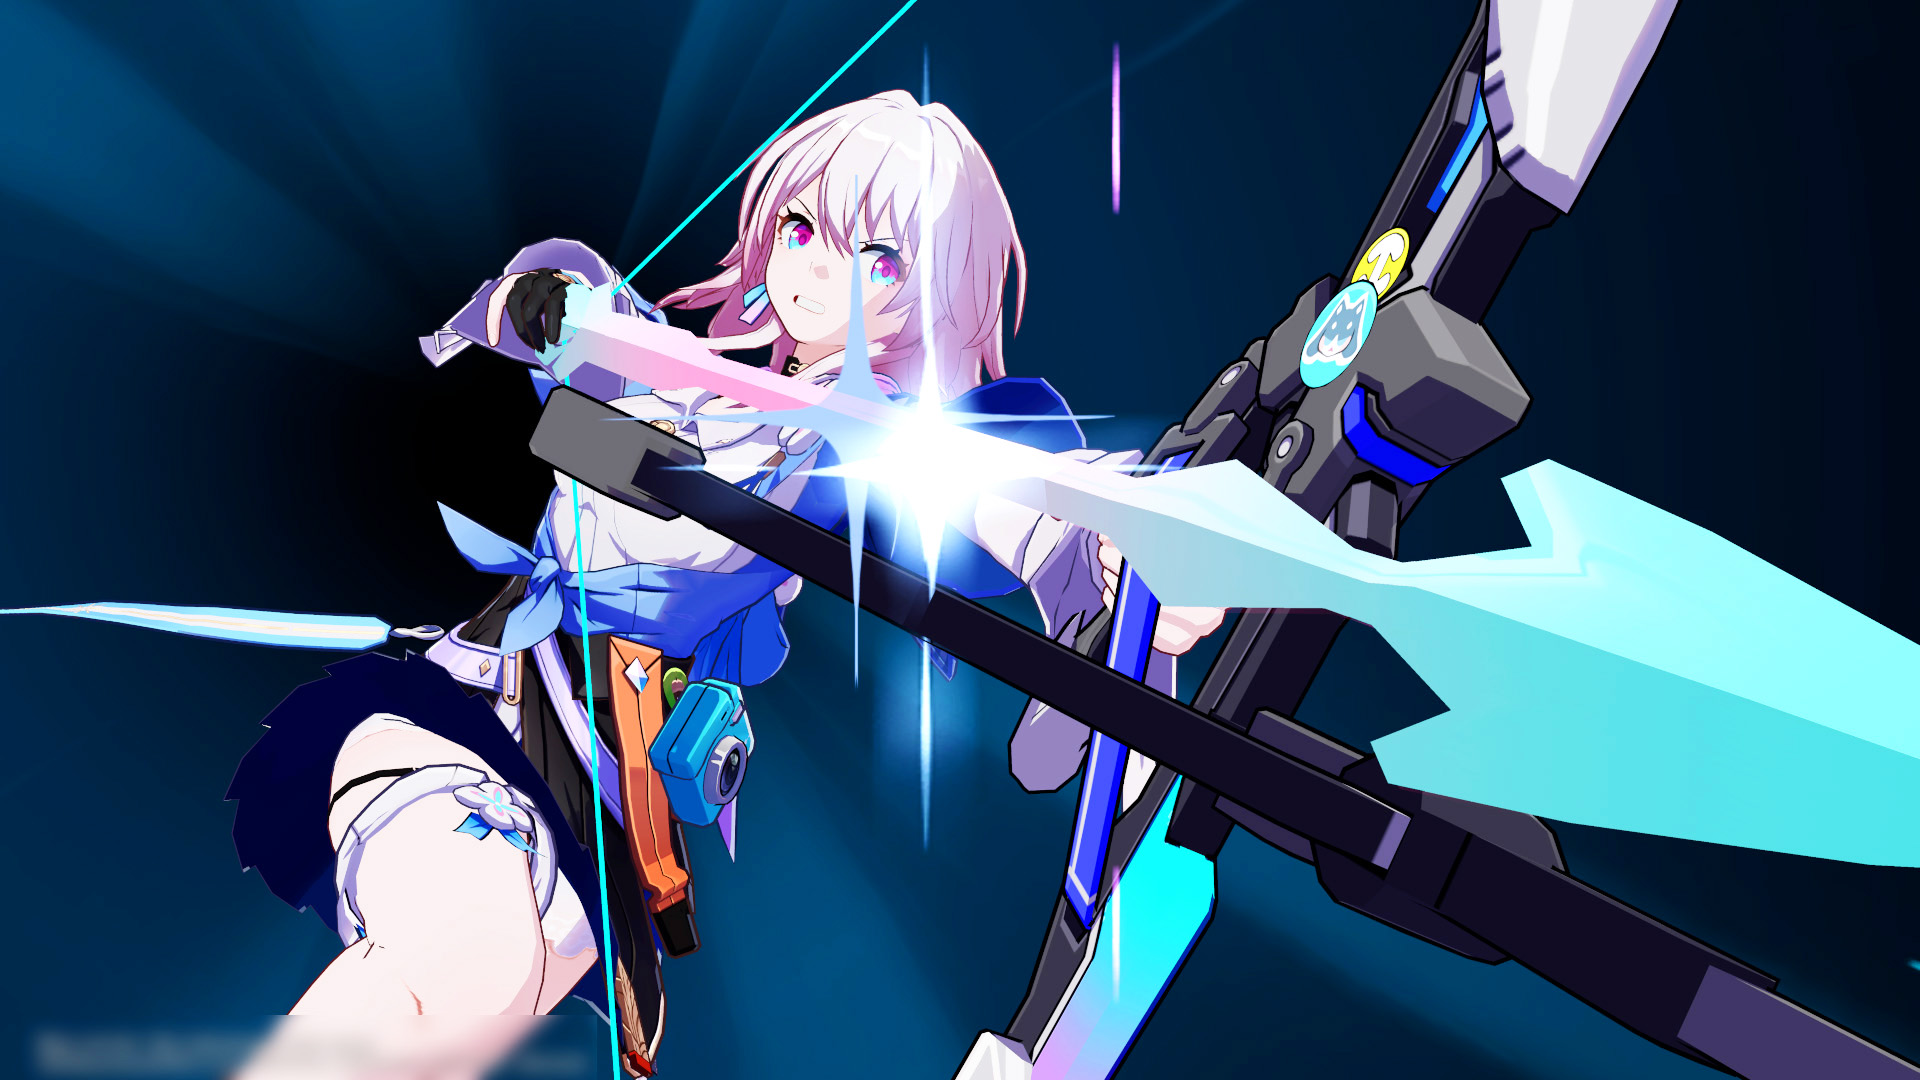 Old Genres, Modern Formats, & Futuristic Travels - Honkai: Star Rail Review  - Gamesline